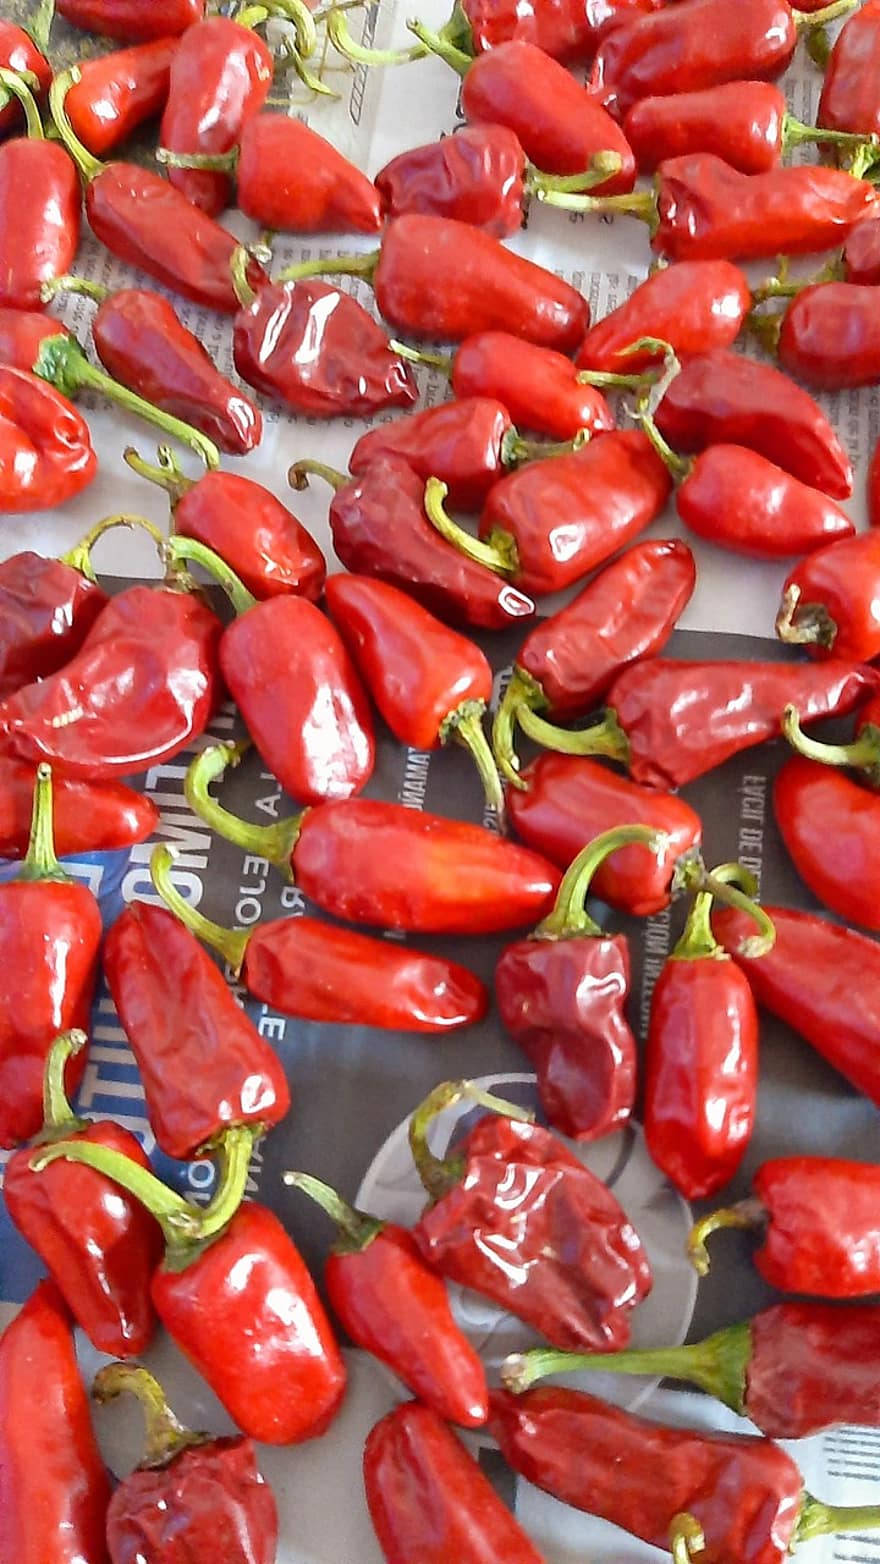 Chilies, Peppers, Vegetables, Food, Red Peppers, Hot, Spicy, Organic, vegetable, freshness, spice